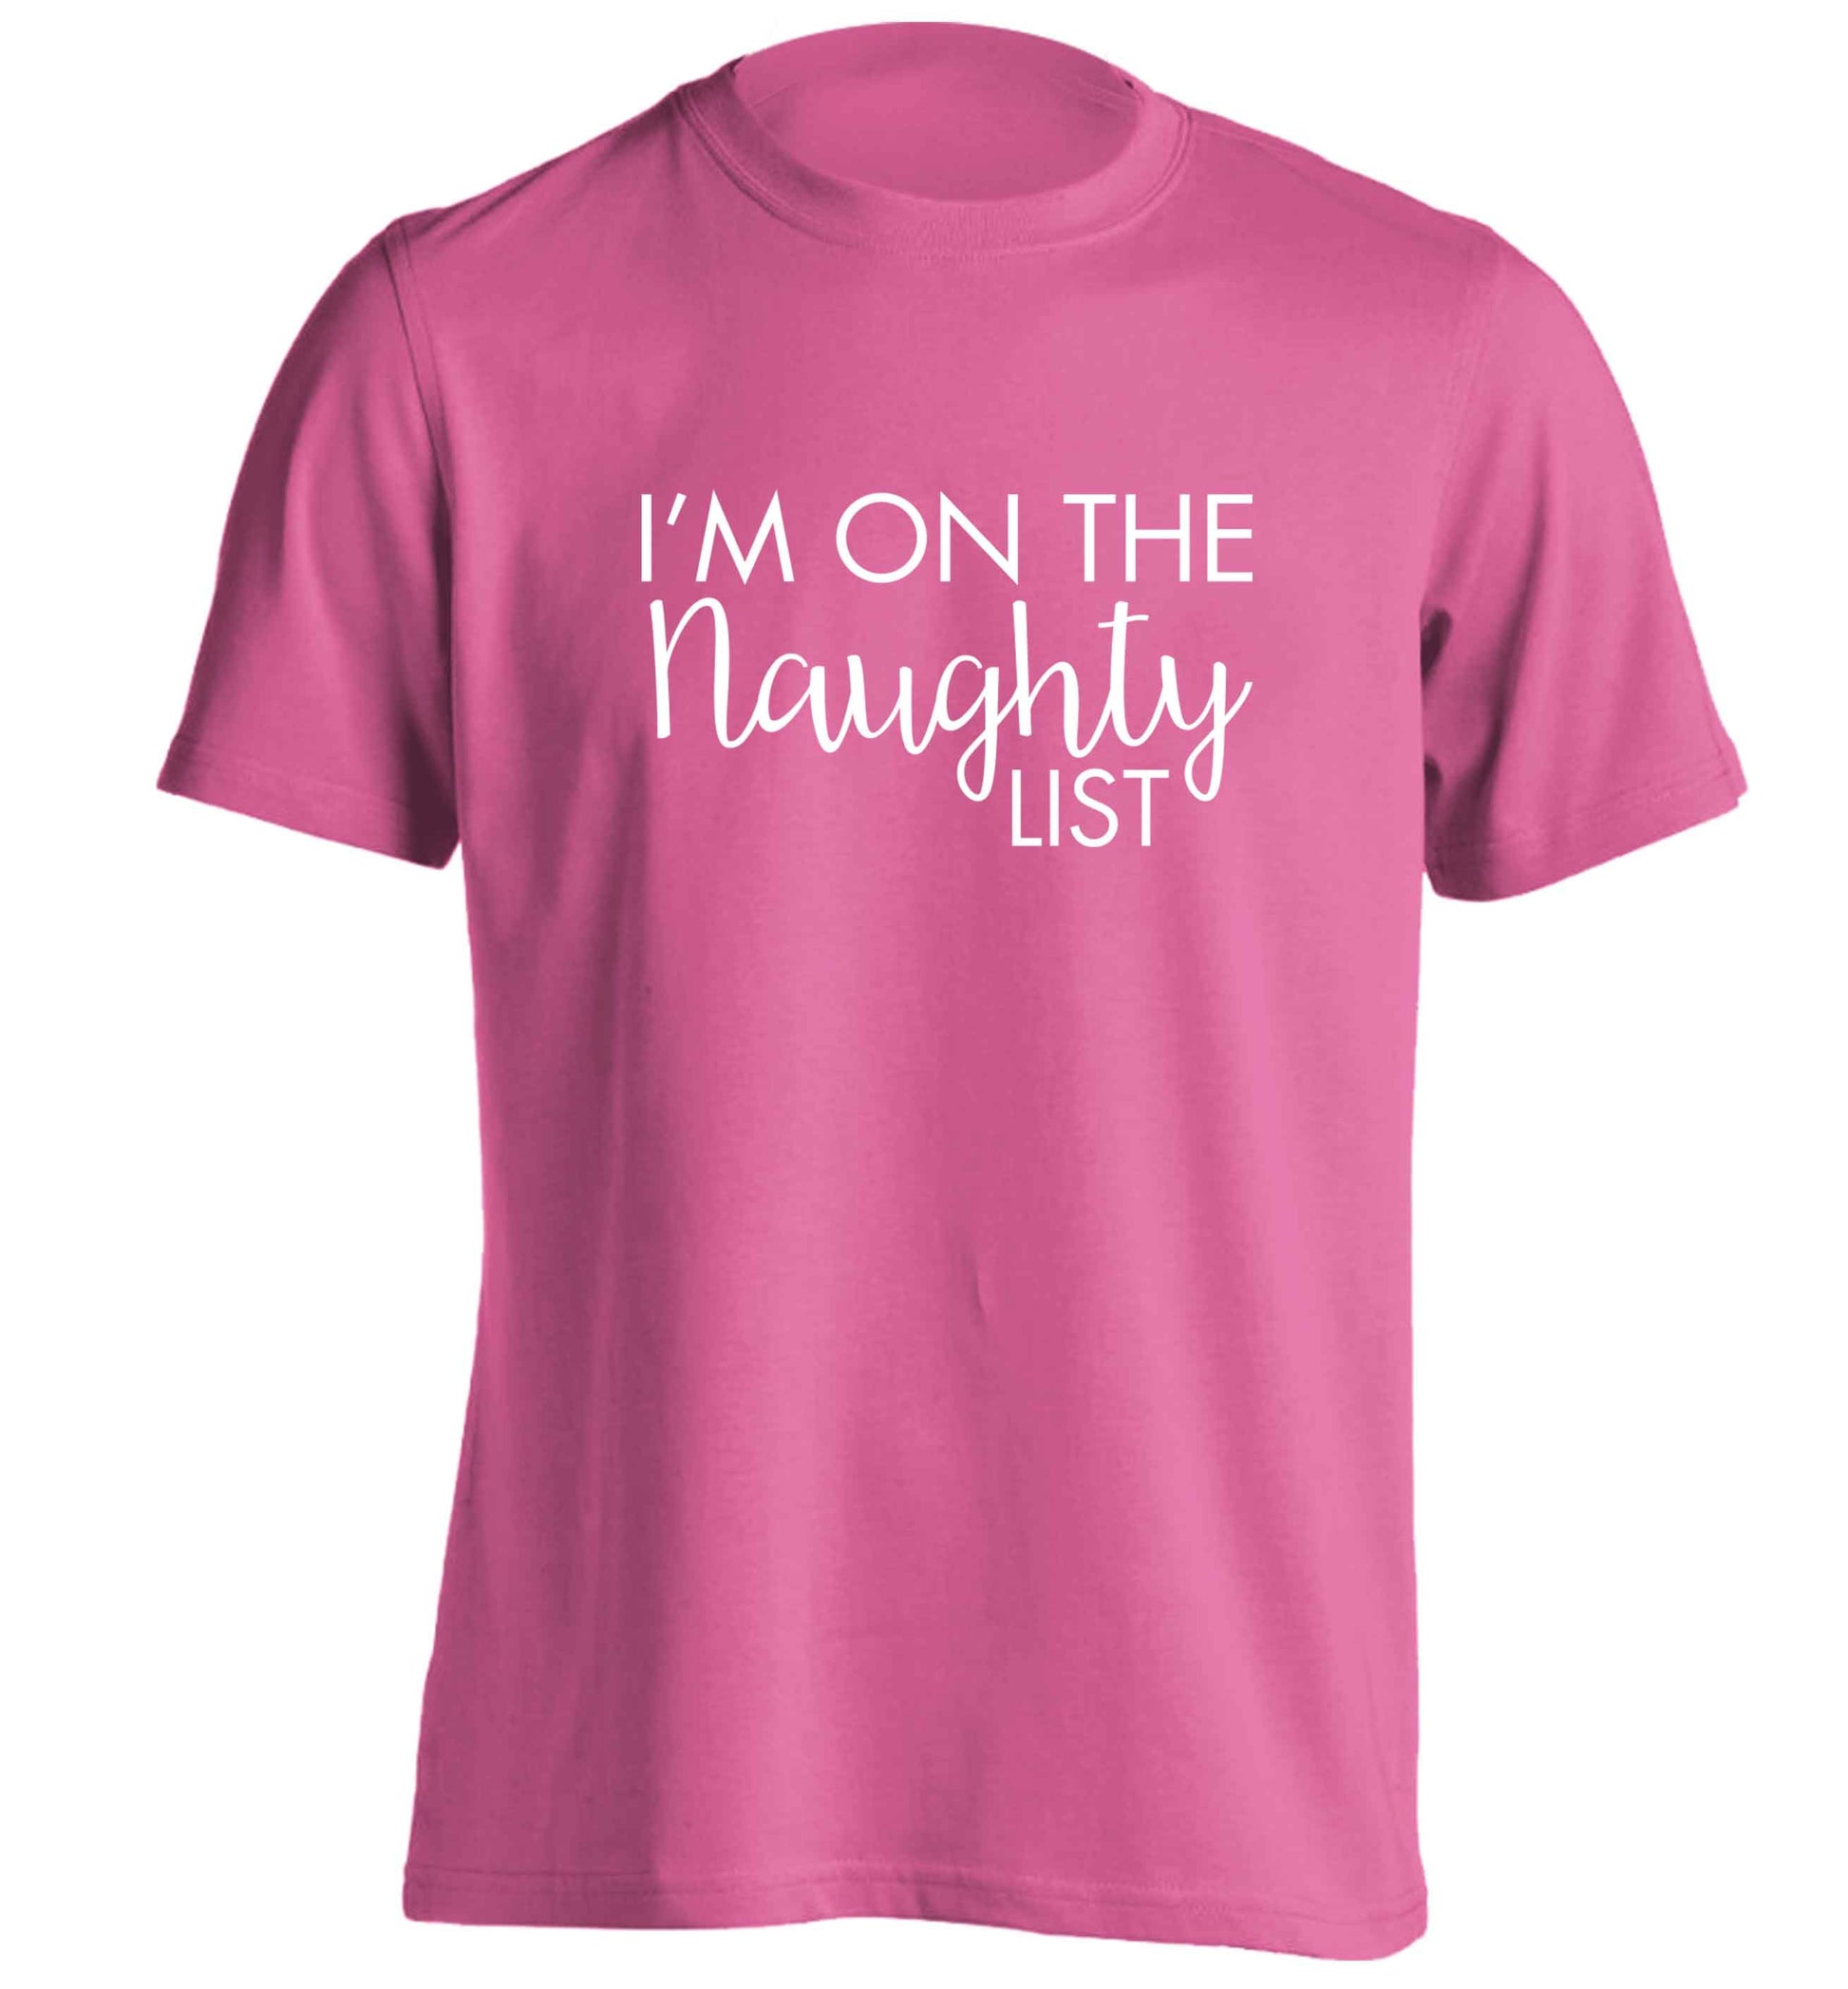 I'm on the naughty list adults unisex pink Tshirt 2XL